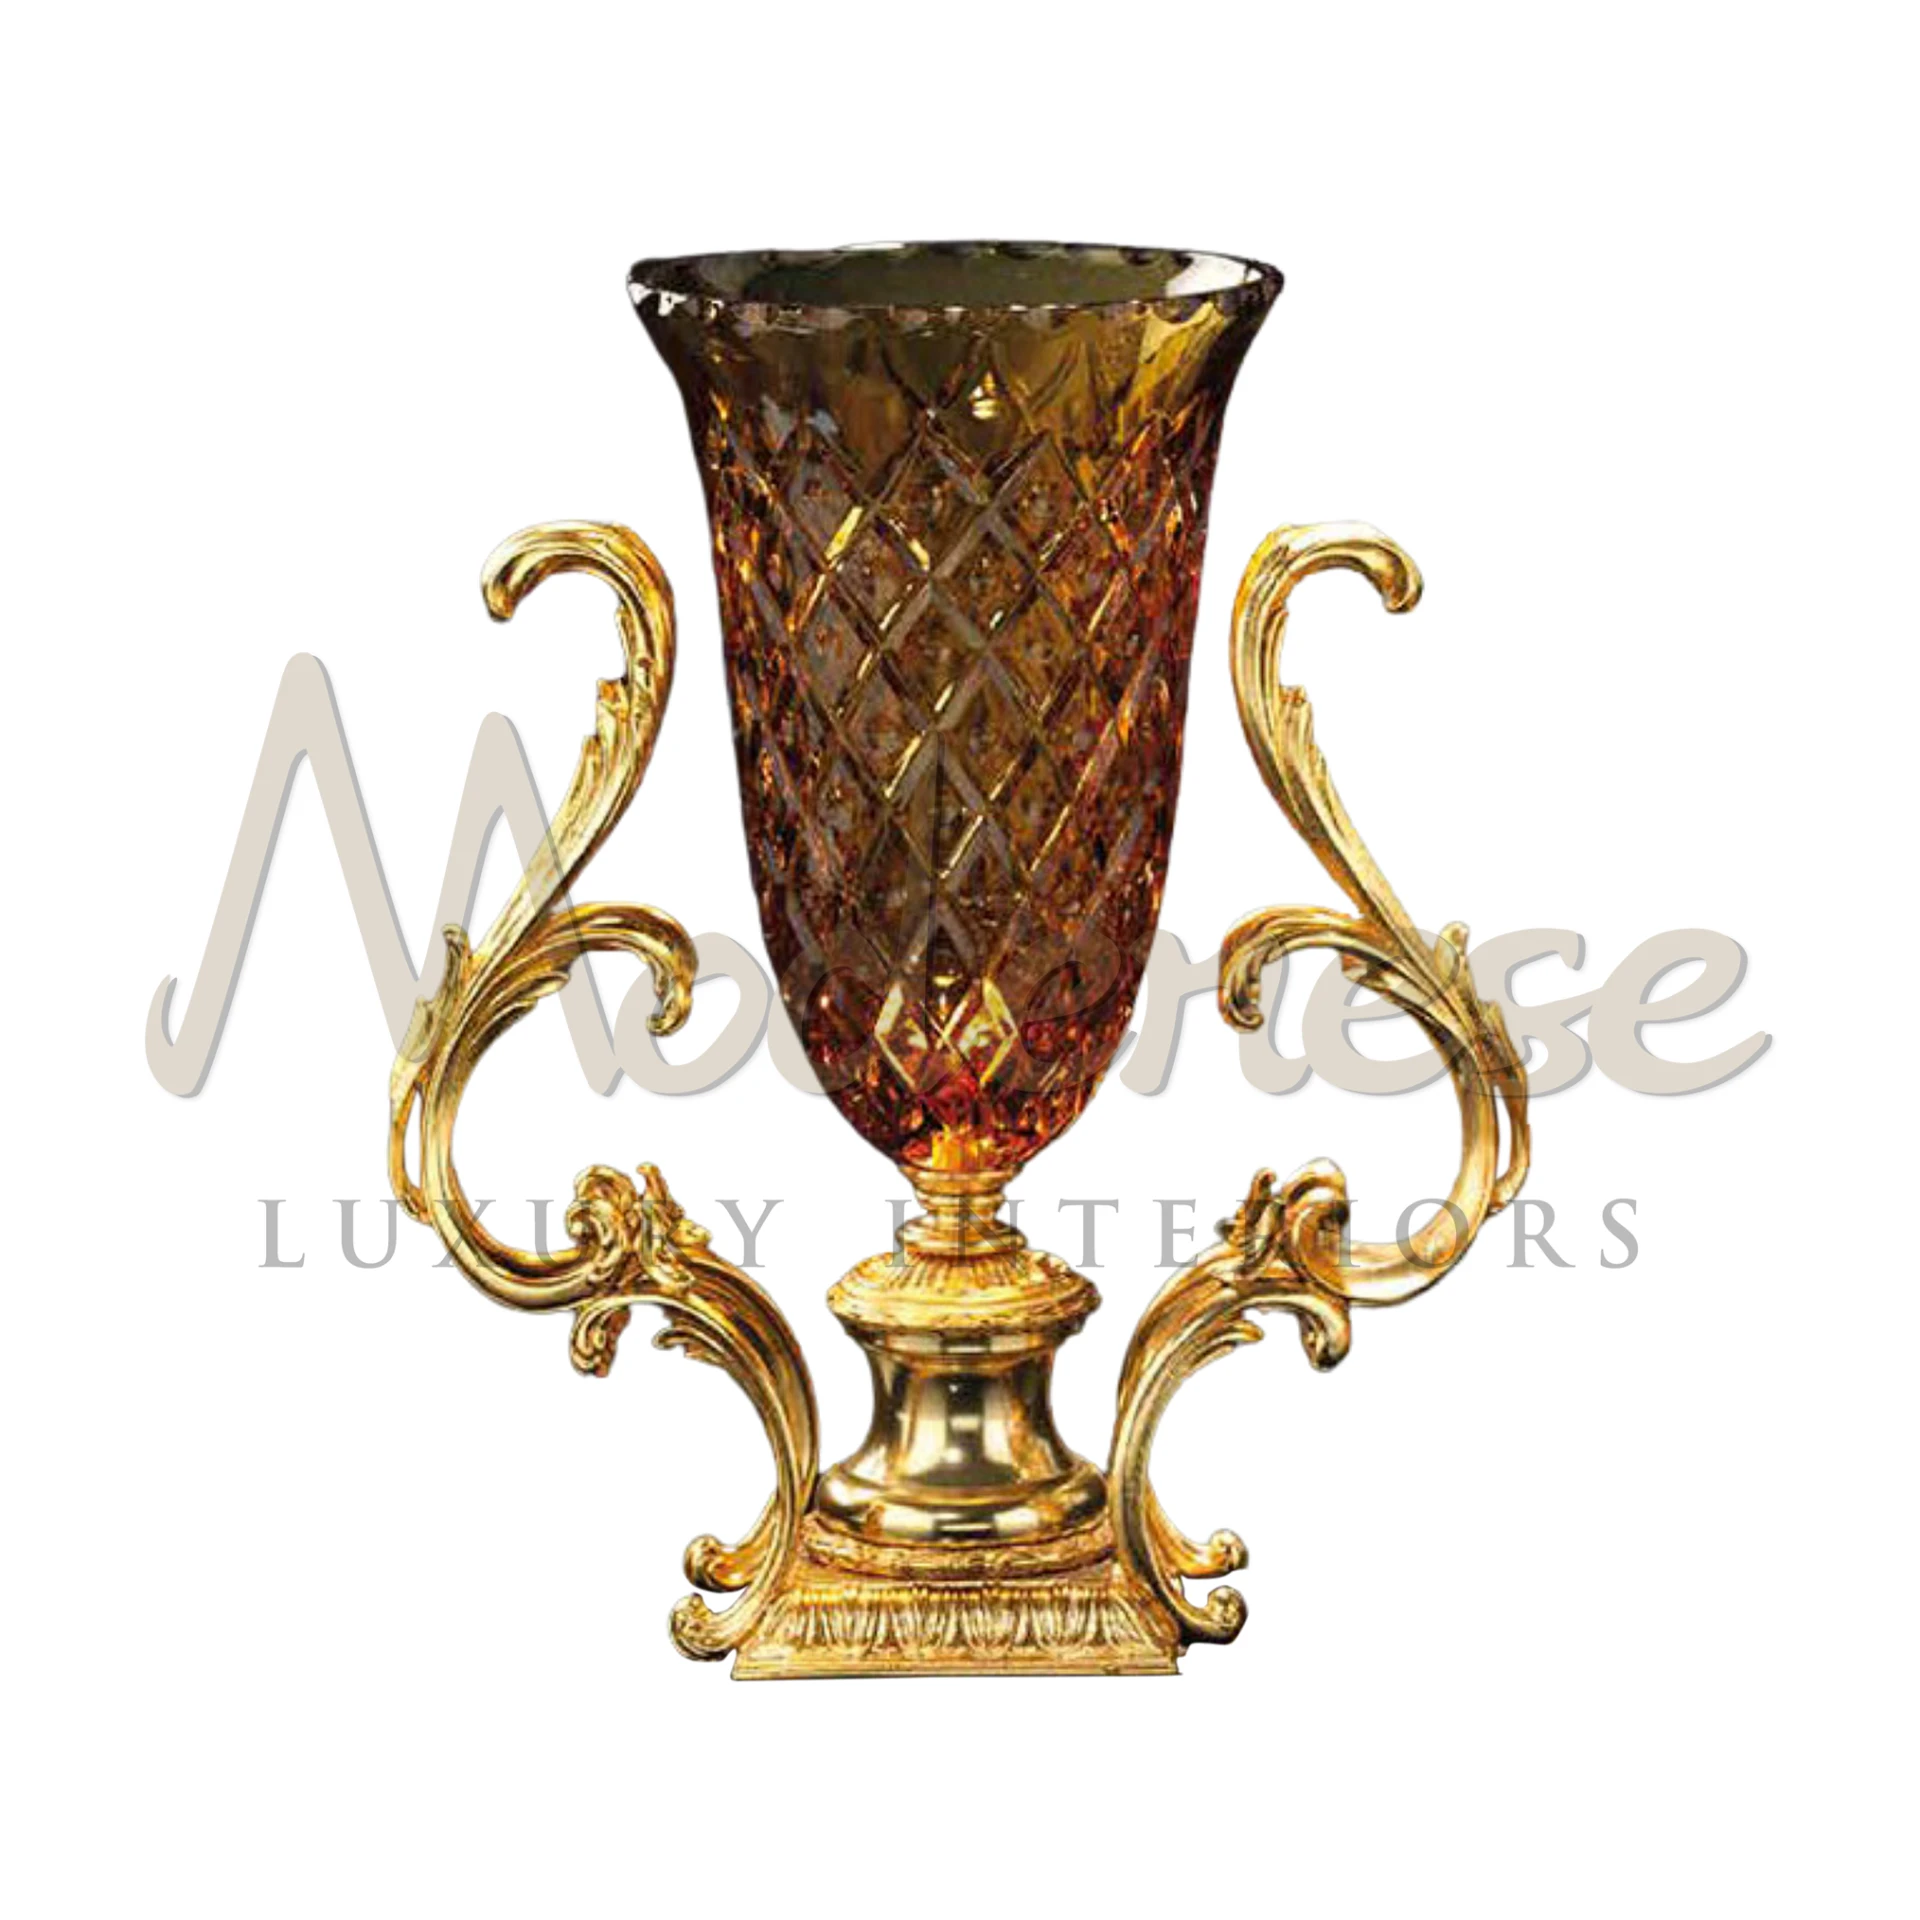 High-end Italian Crystal Vase by Modenese, featuring intricate designs and exceptional craftsmanship for luxury interiors.